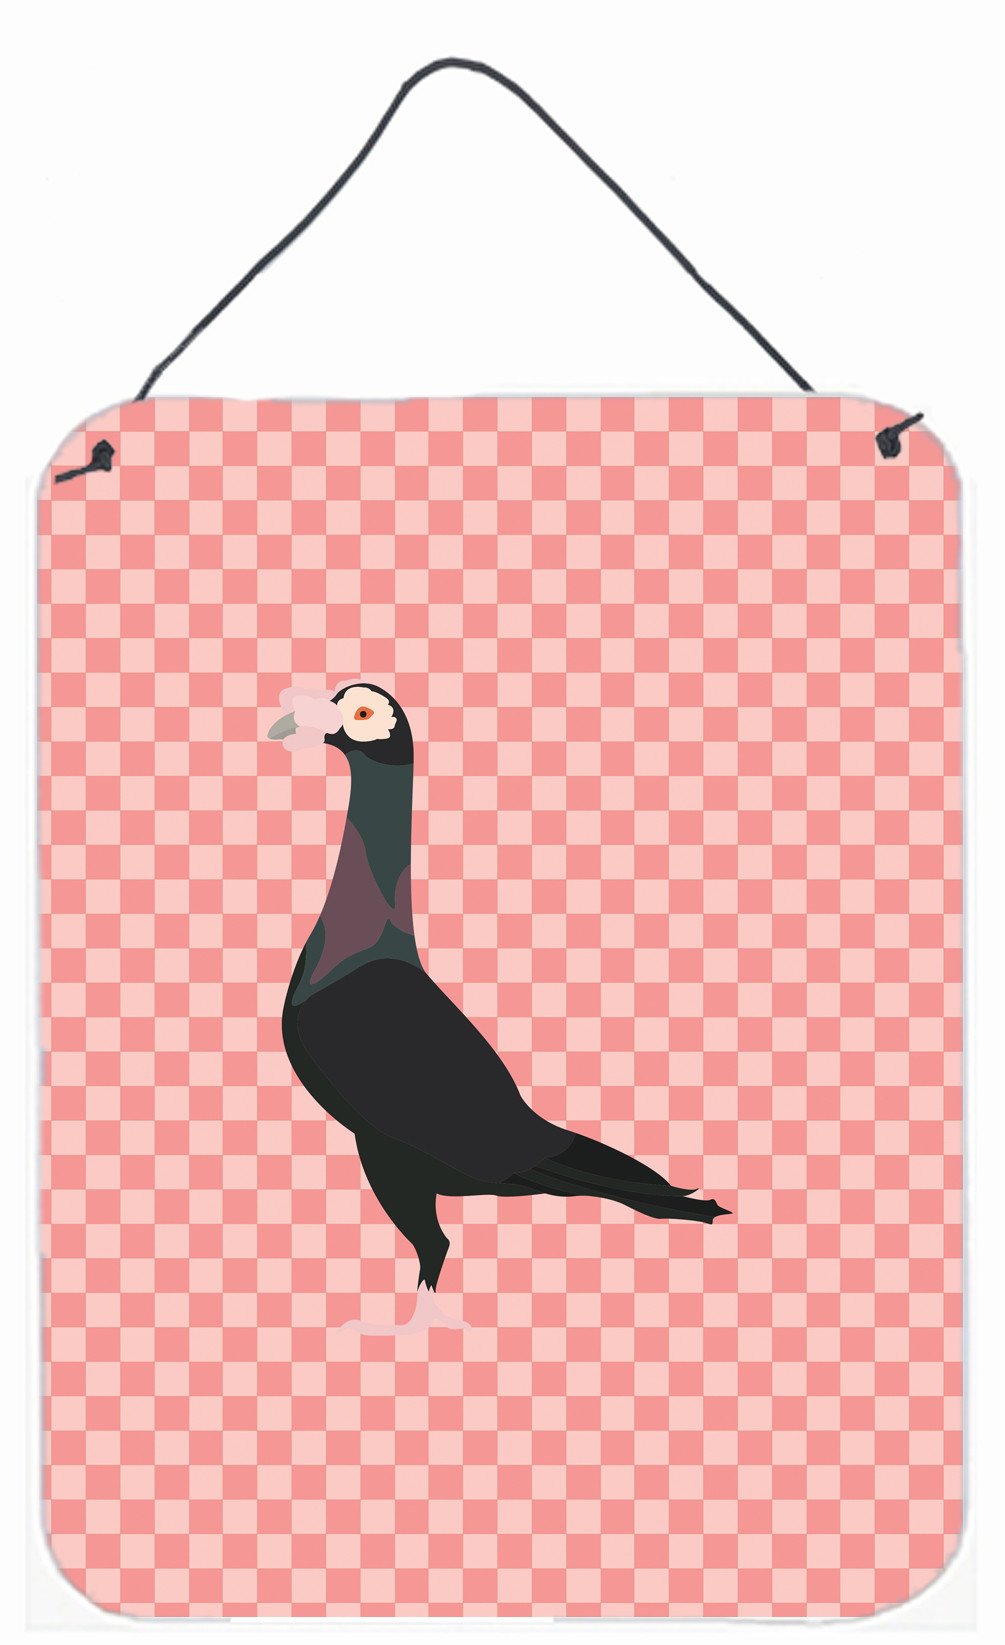 English Carrier Pigeon Pink Check Wall or Door Hanging Prints BB7945DS1216 by Caroline's Treasures